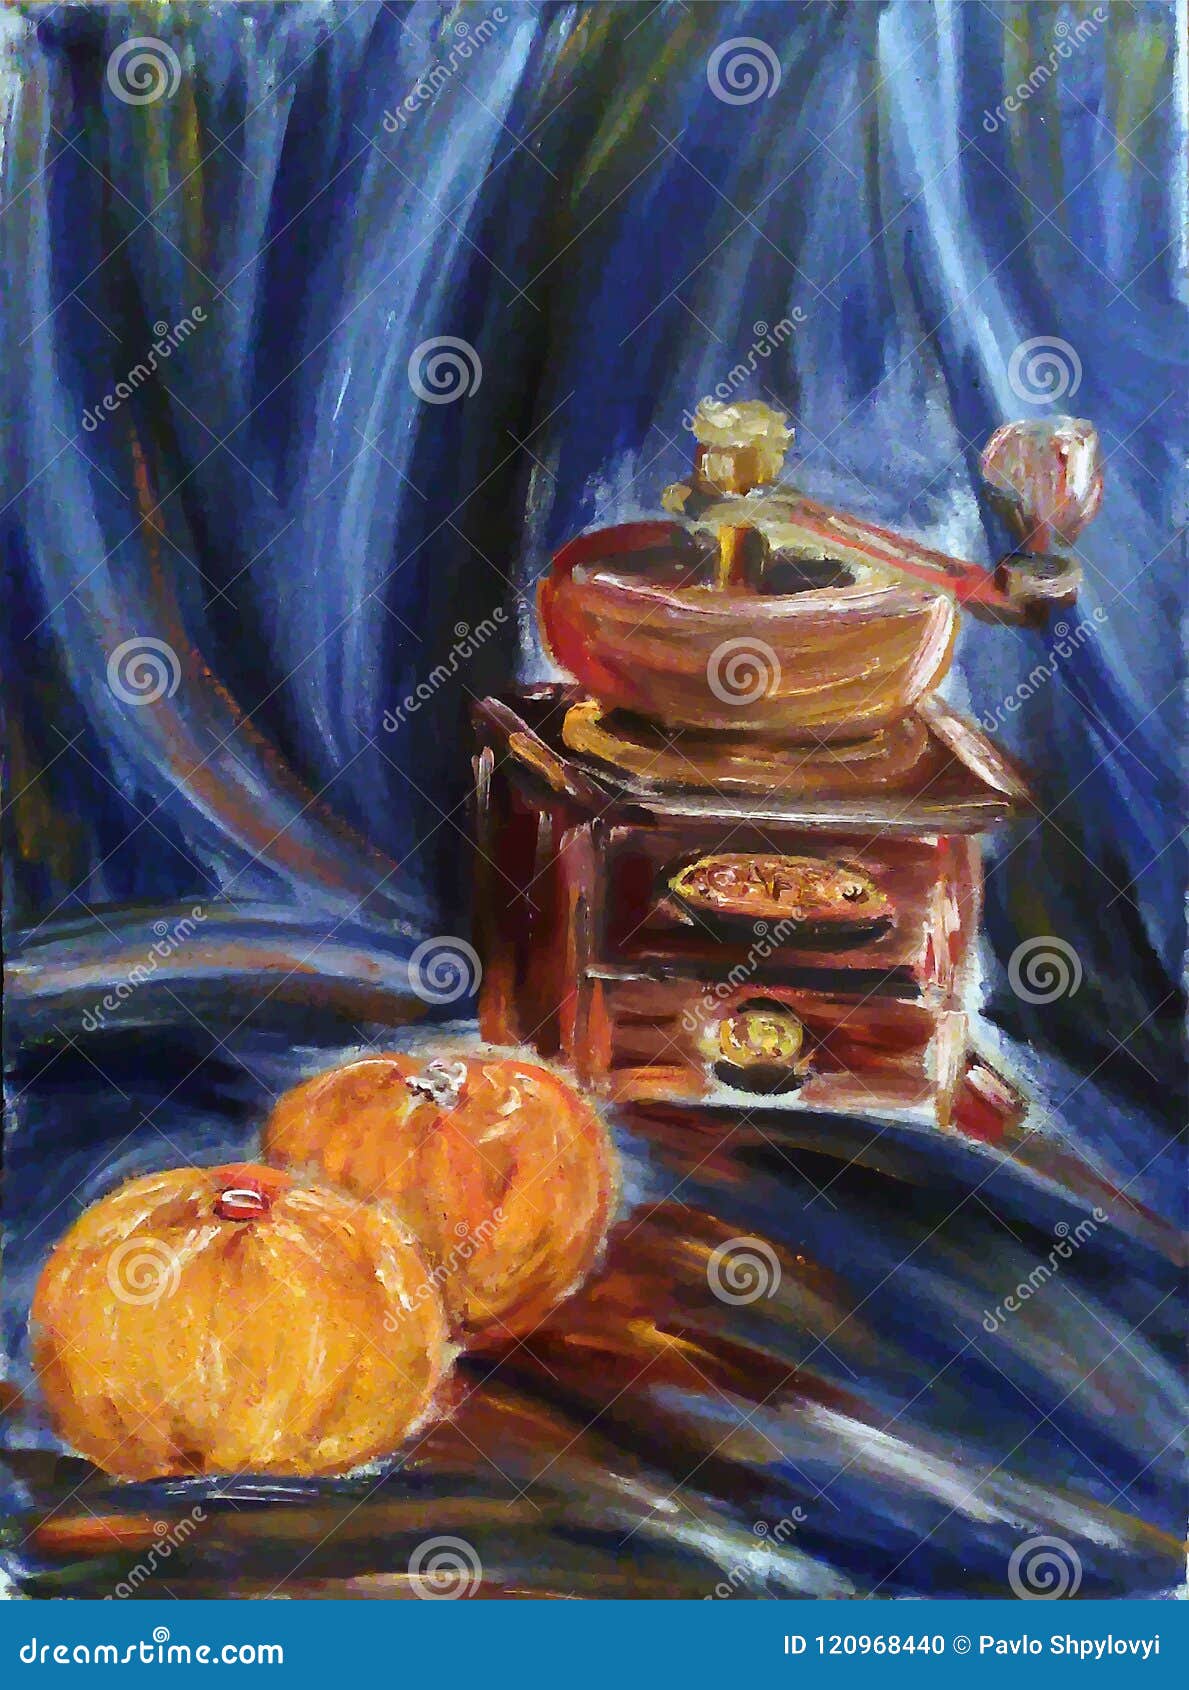 painted still life with coffee mill and oranges on blue textile